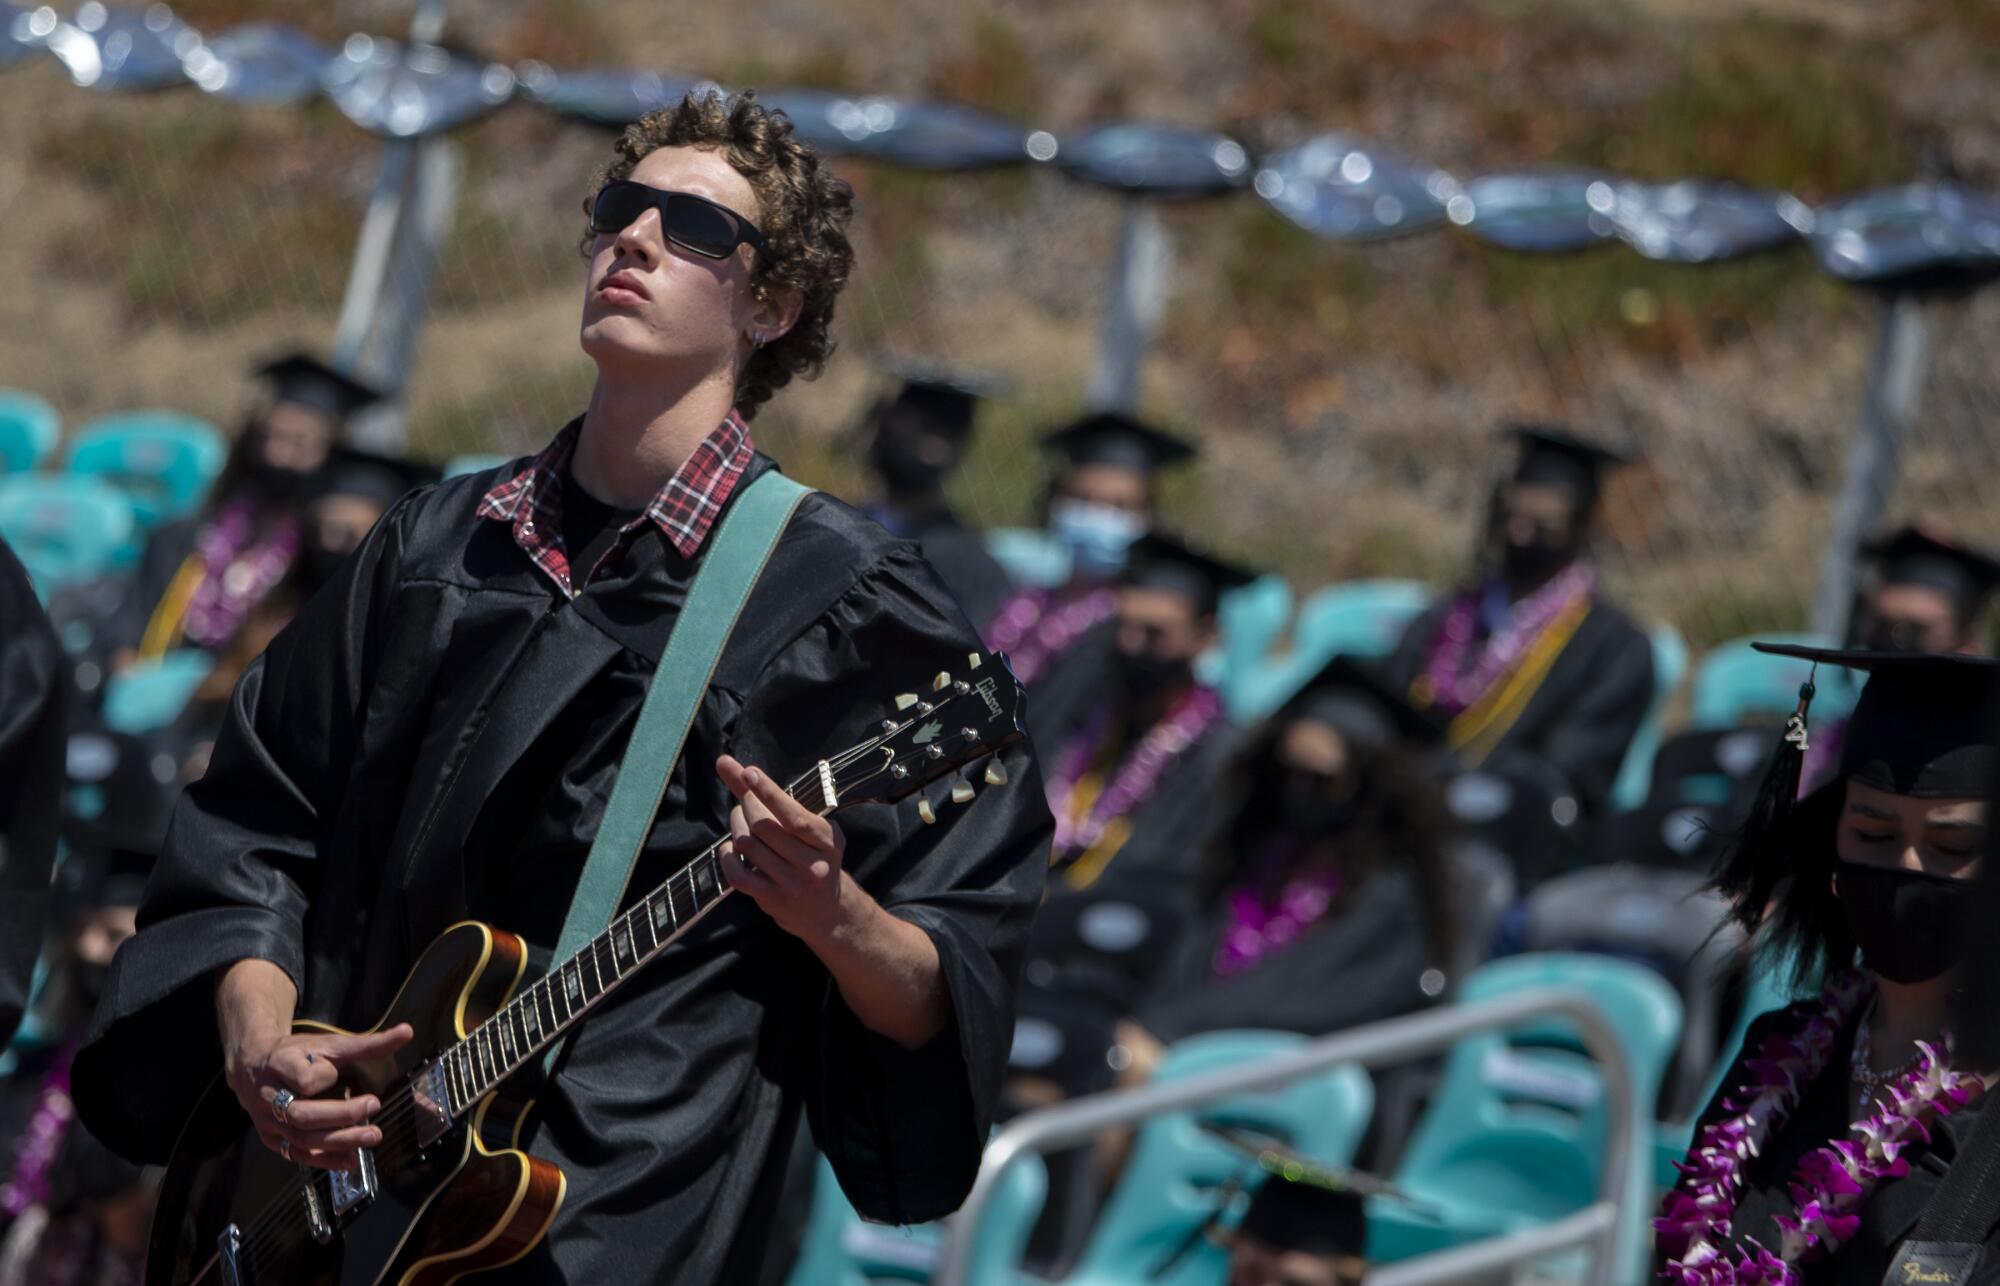 A student in sunglasses plays a guitar.